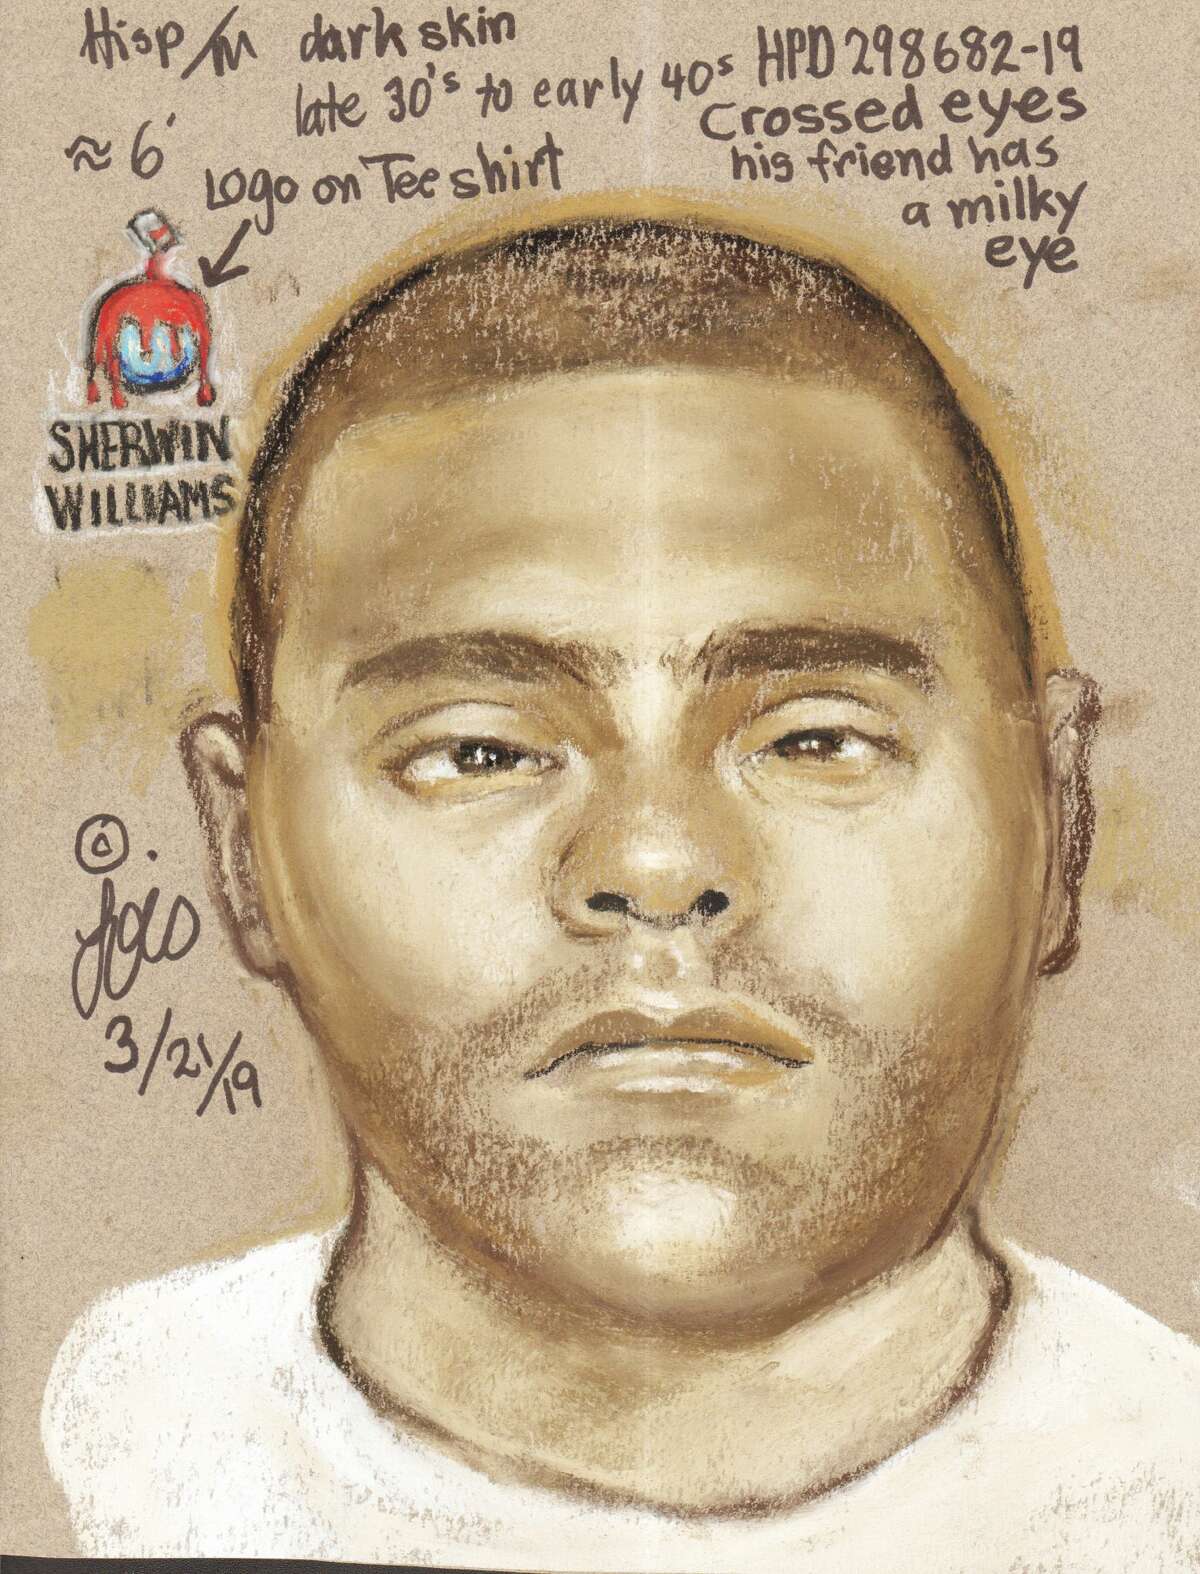 The Houston Police Department is searching for a cross-eyed suspect accused of killing two outside a bar March 9, 2019. Anyone with information is urged to call HPD’s homicide detectives at 713-308-3600 or Houston Crime Stoppers at 713-222-TIPS (8477).